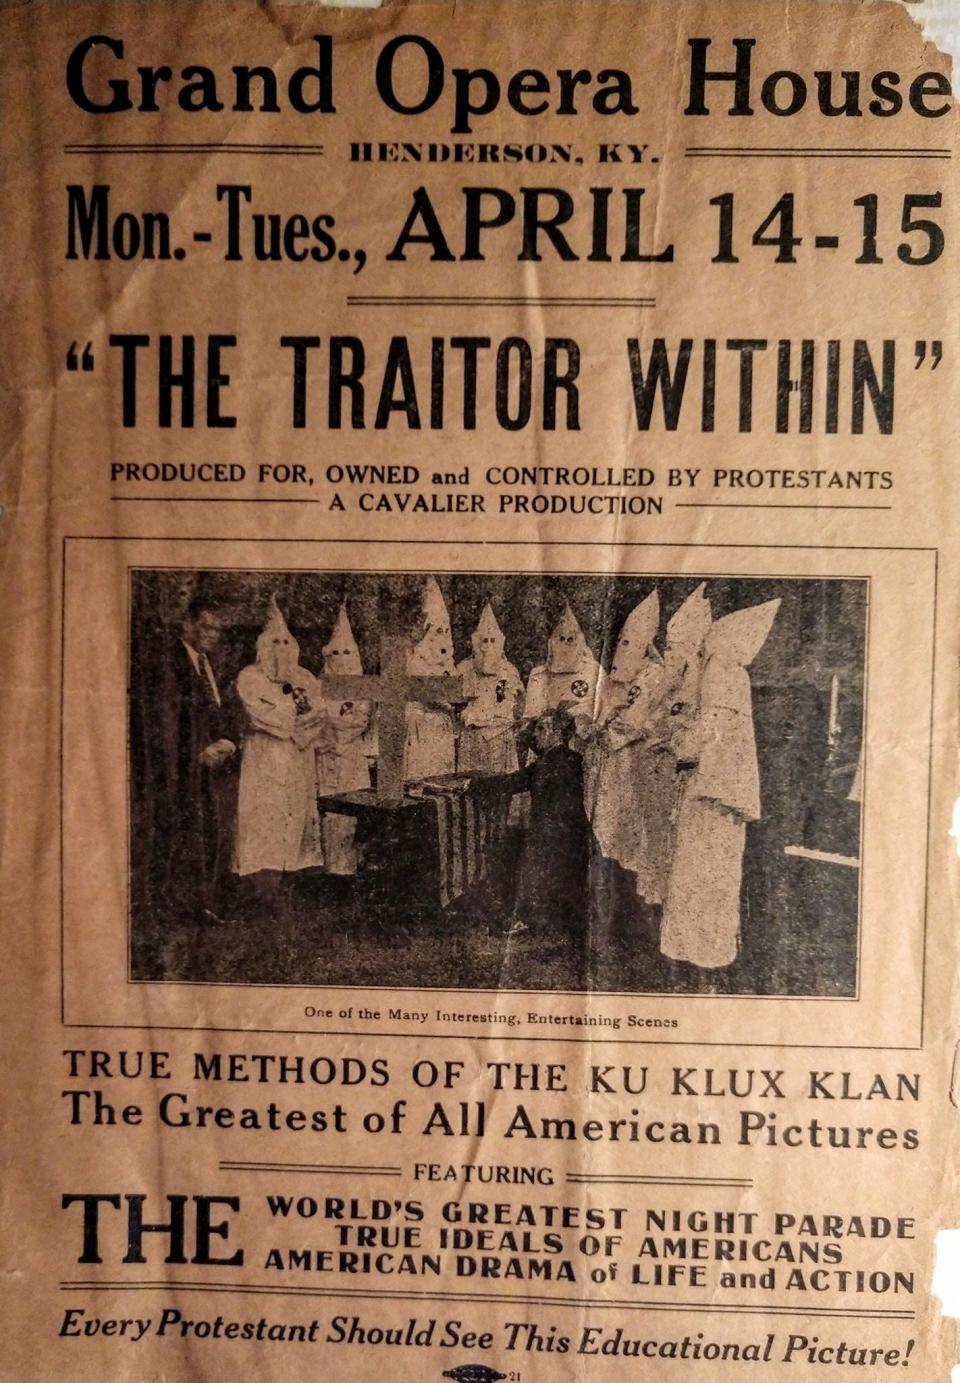 The Ku Klux Klan was a major force in Henderson in the mid-1920s, as attested by its ability to use Henderson's largest theater in 1924 to show this recruiting film. The Klan first made its presence known here in December 1921 but it didn't really come out of the shadows until May 1922.